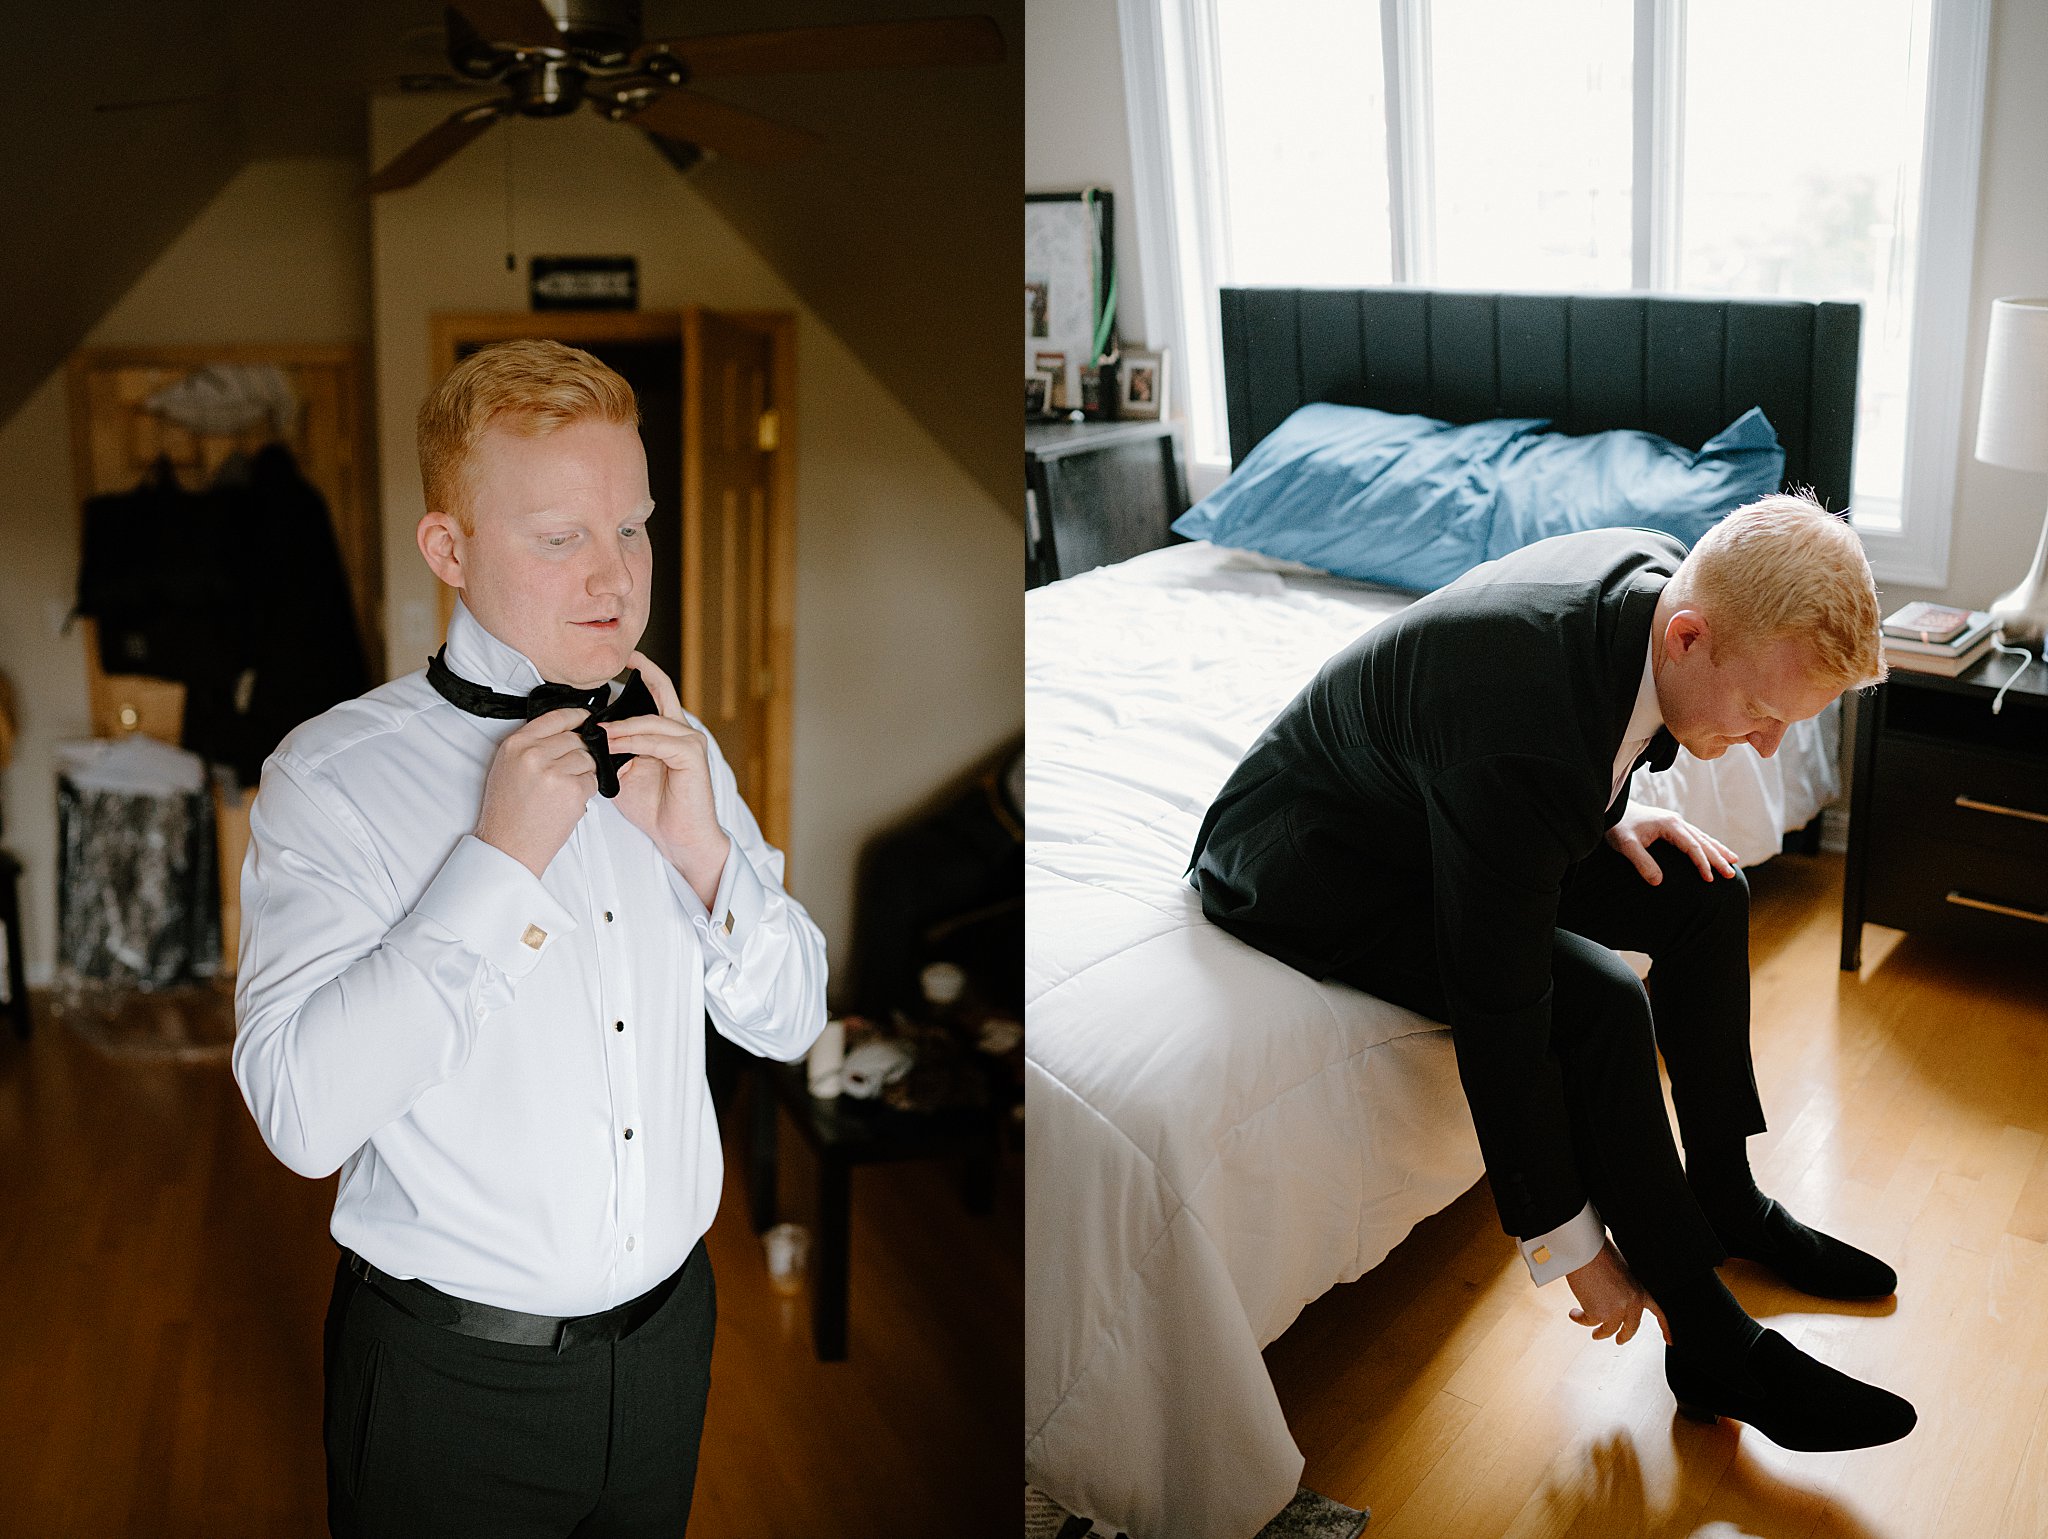 groom fixes tie and puts on shoes by Indigo Lace Collective